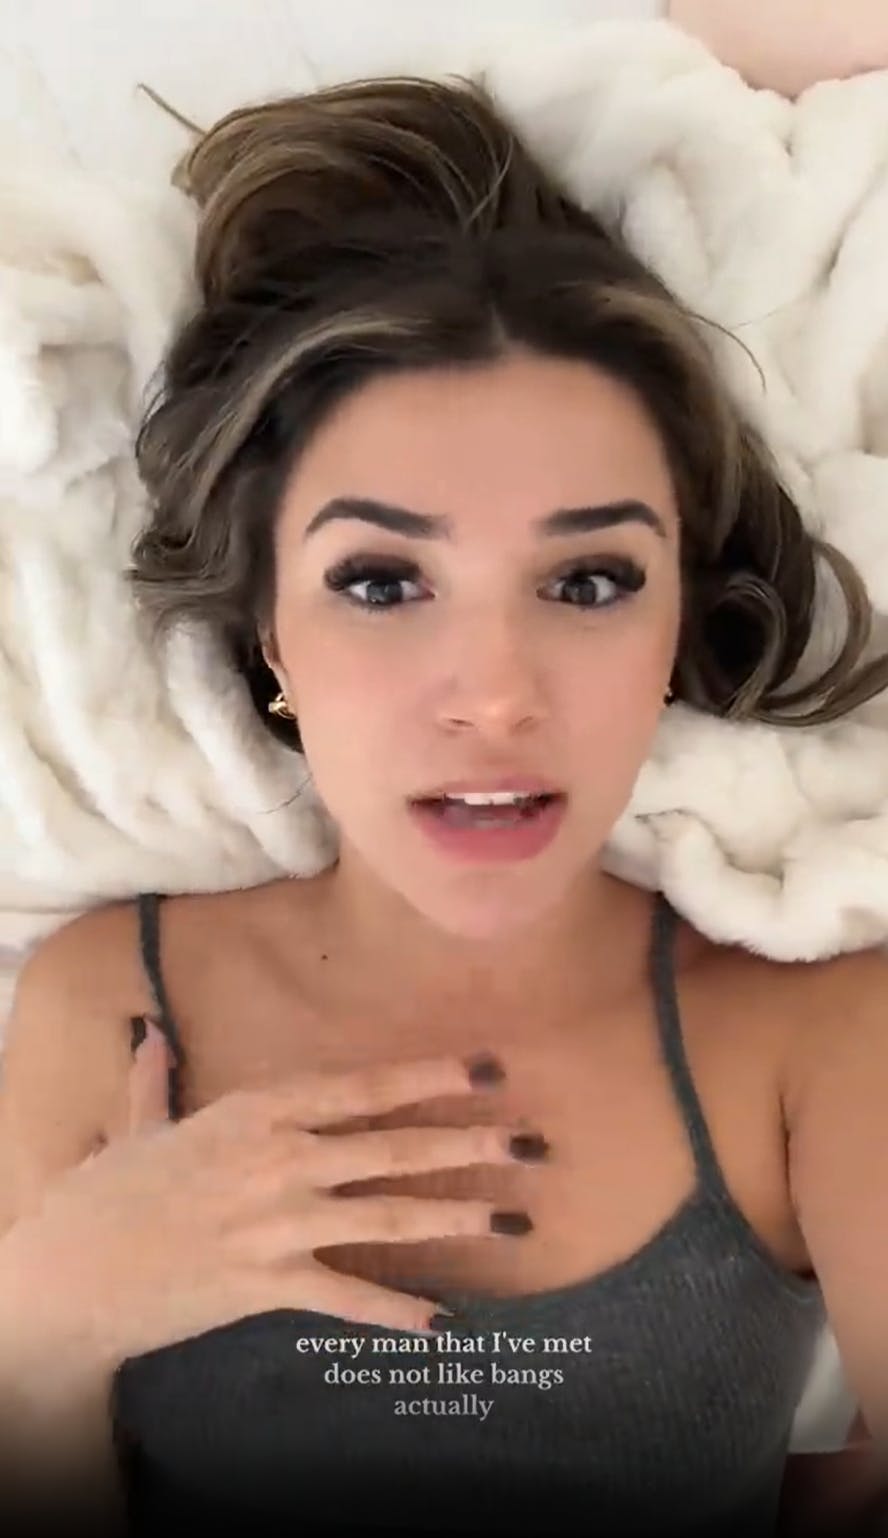 A brunette woman lying on a white fluffy blanket, holding her hand to her chest. Captions on the image read, 'every man that I've met does not like bangs actually.'